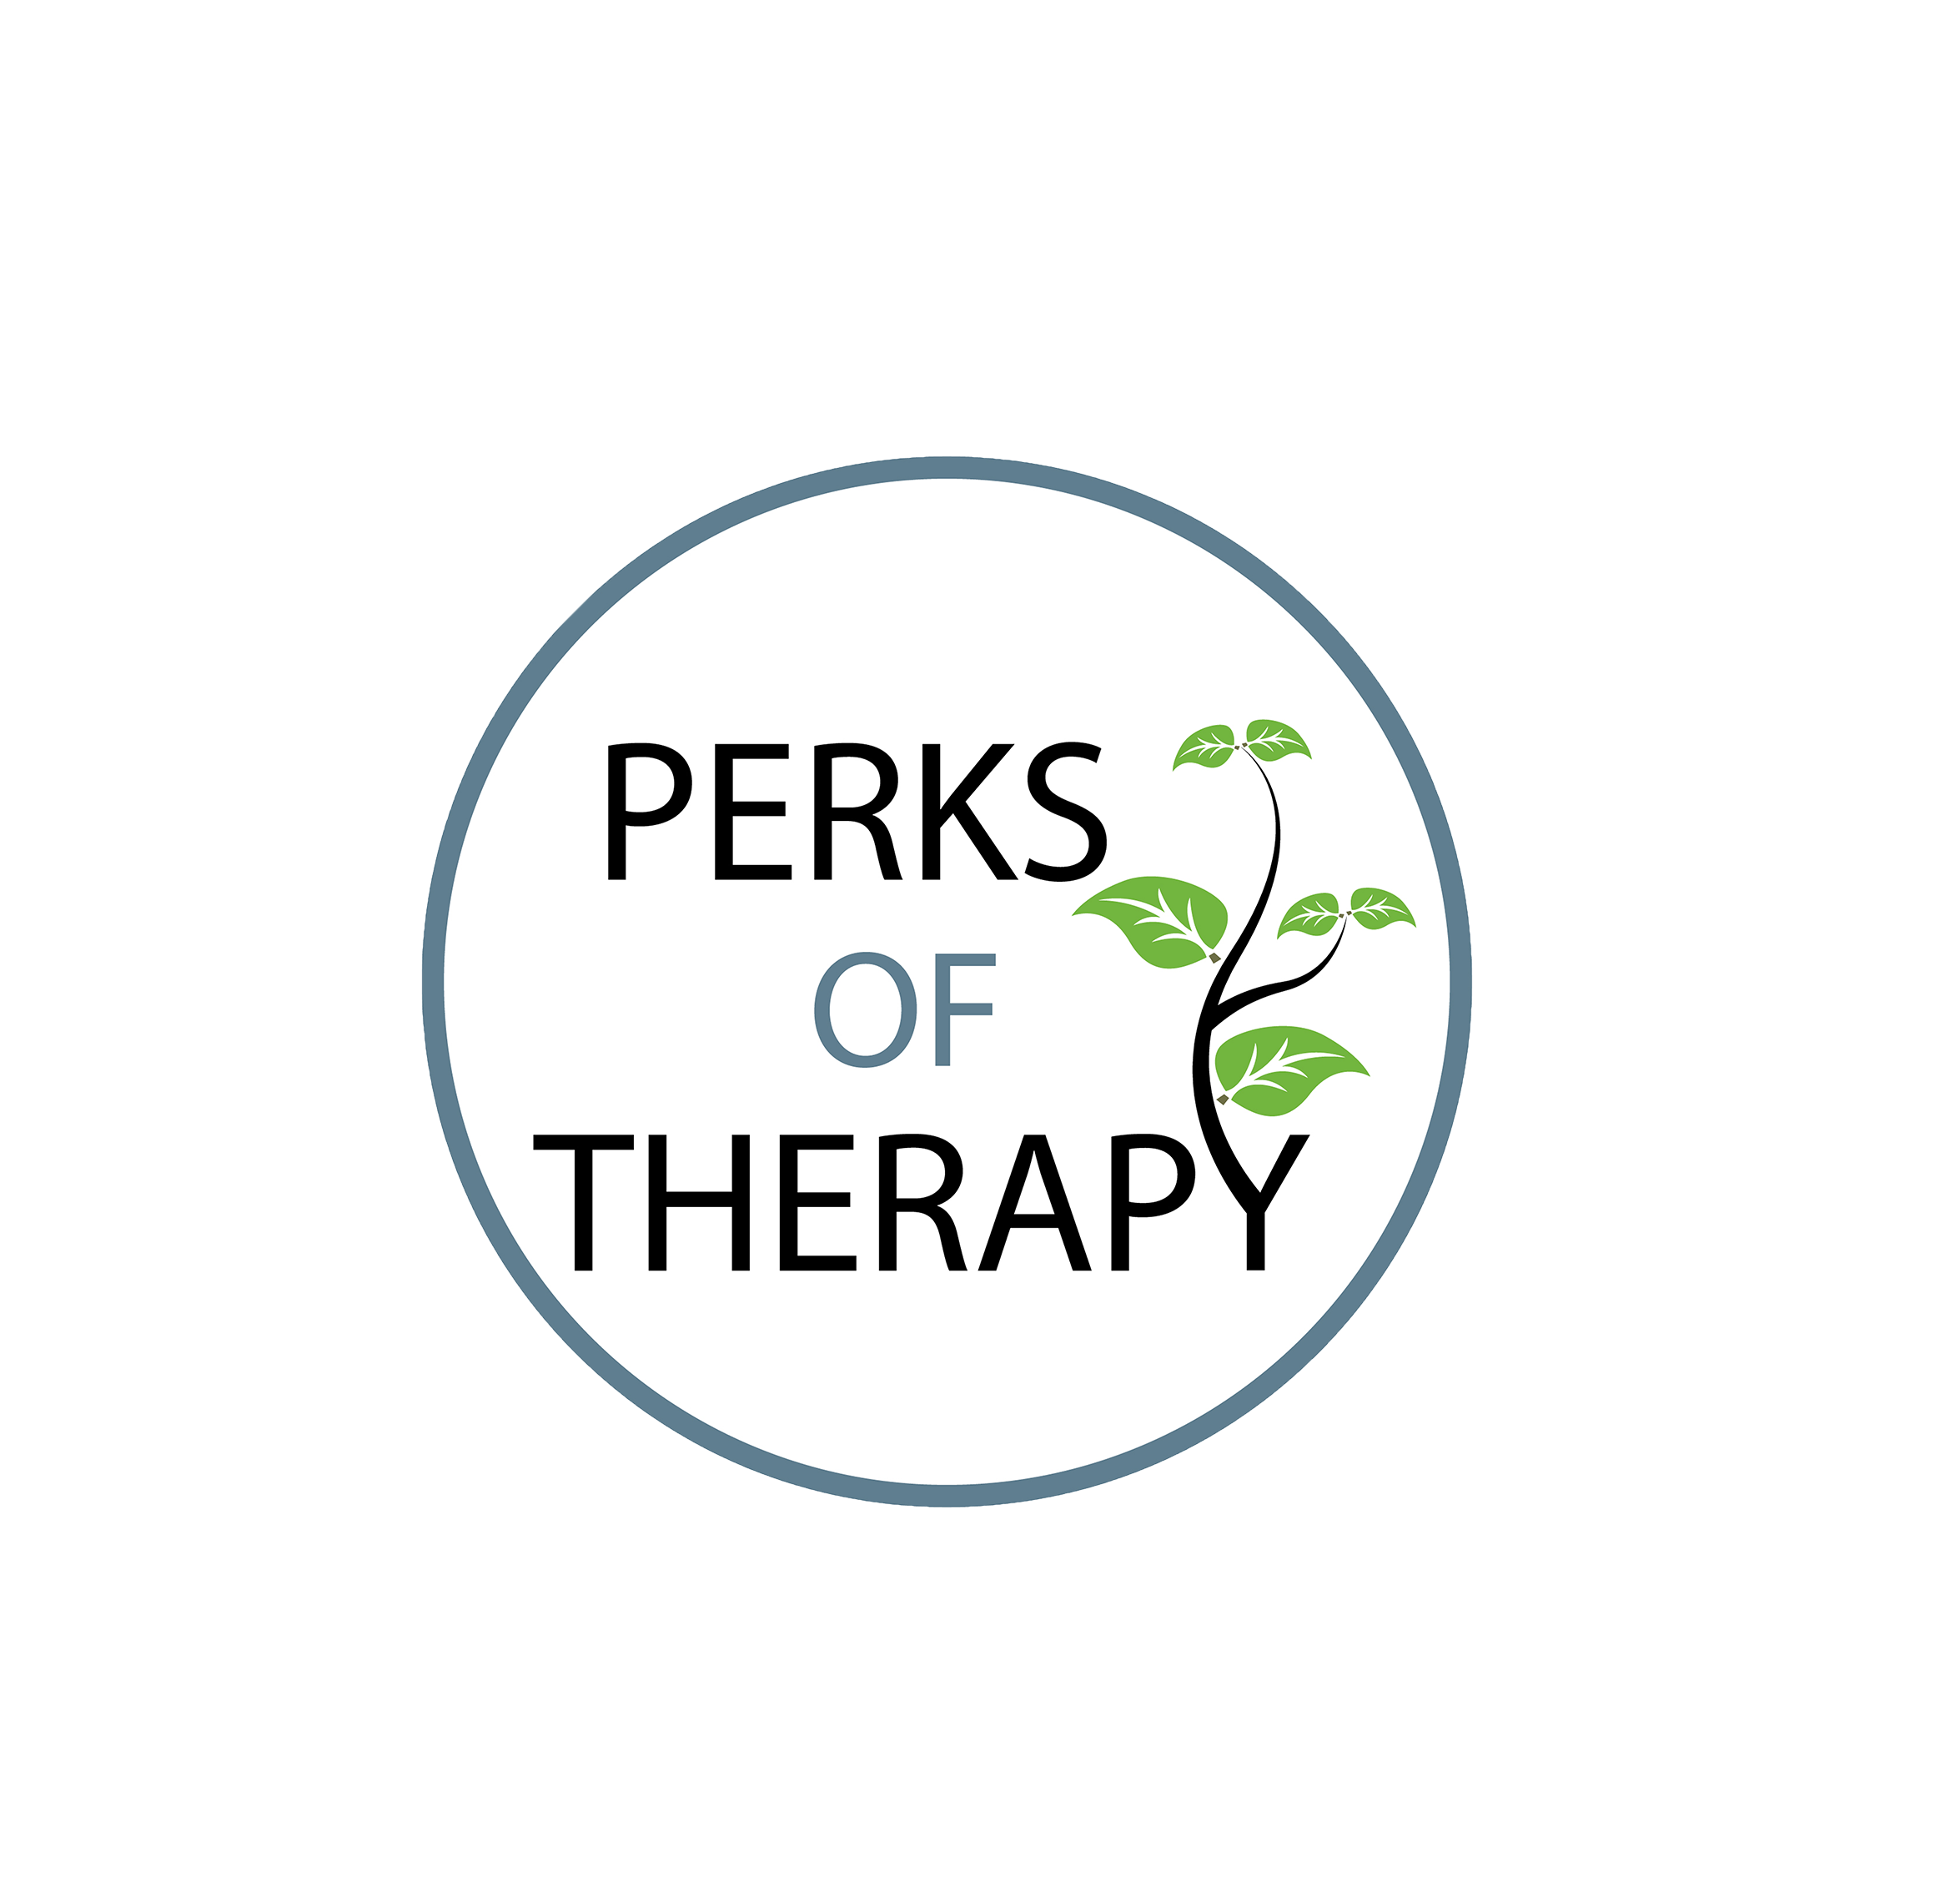 Perks of Therapy LLC